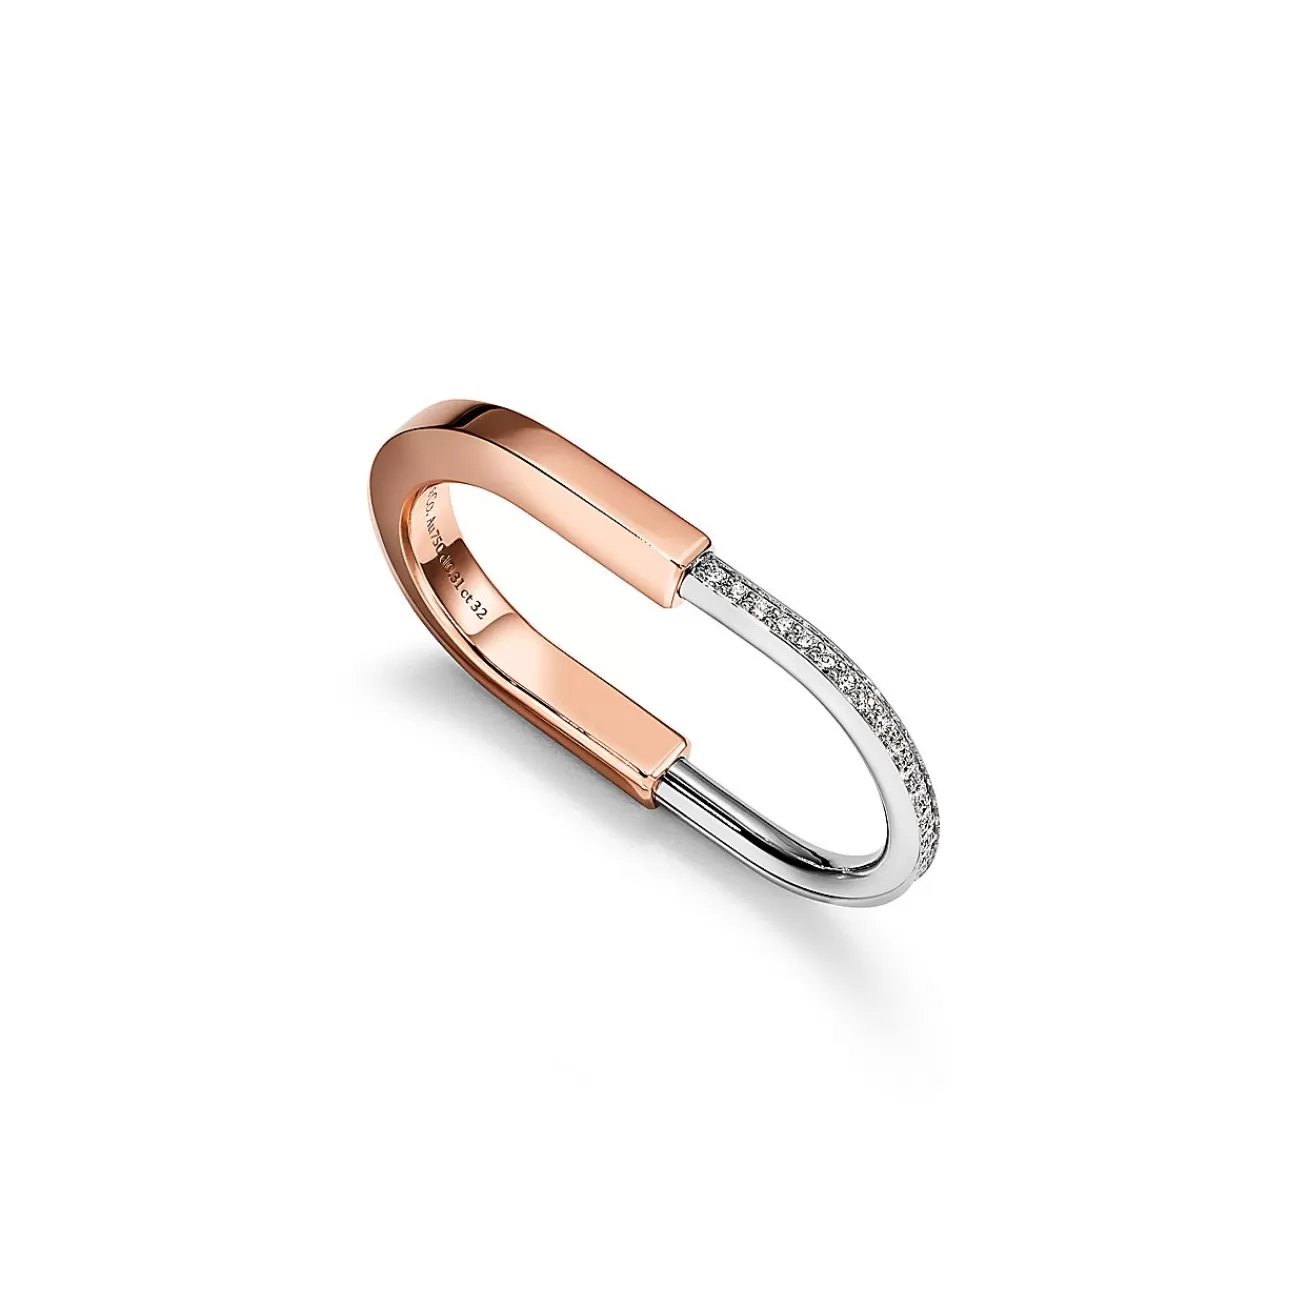 Tiffany & Co. Tiffany Lock Two-finger Ring in Rose and White Gold with Diamonds | ^ Rings | Stacking Rings